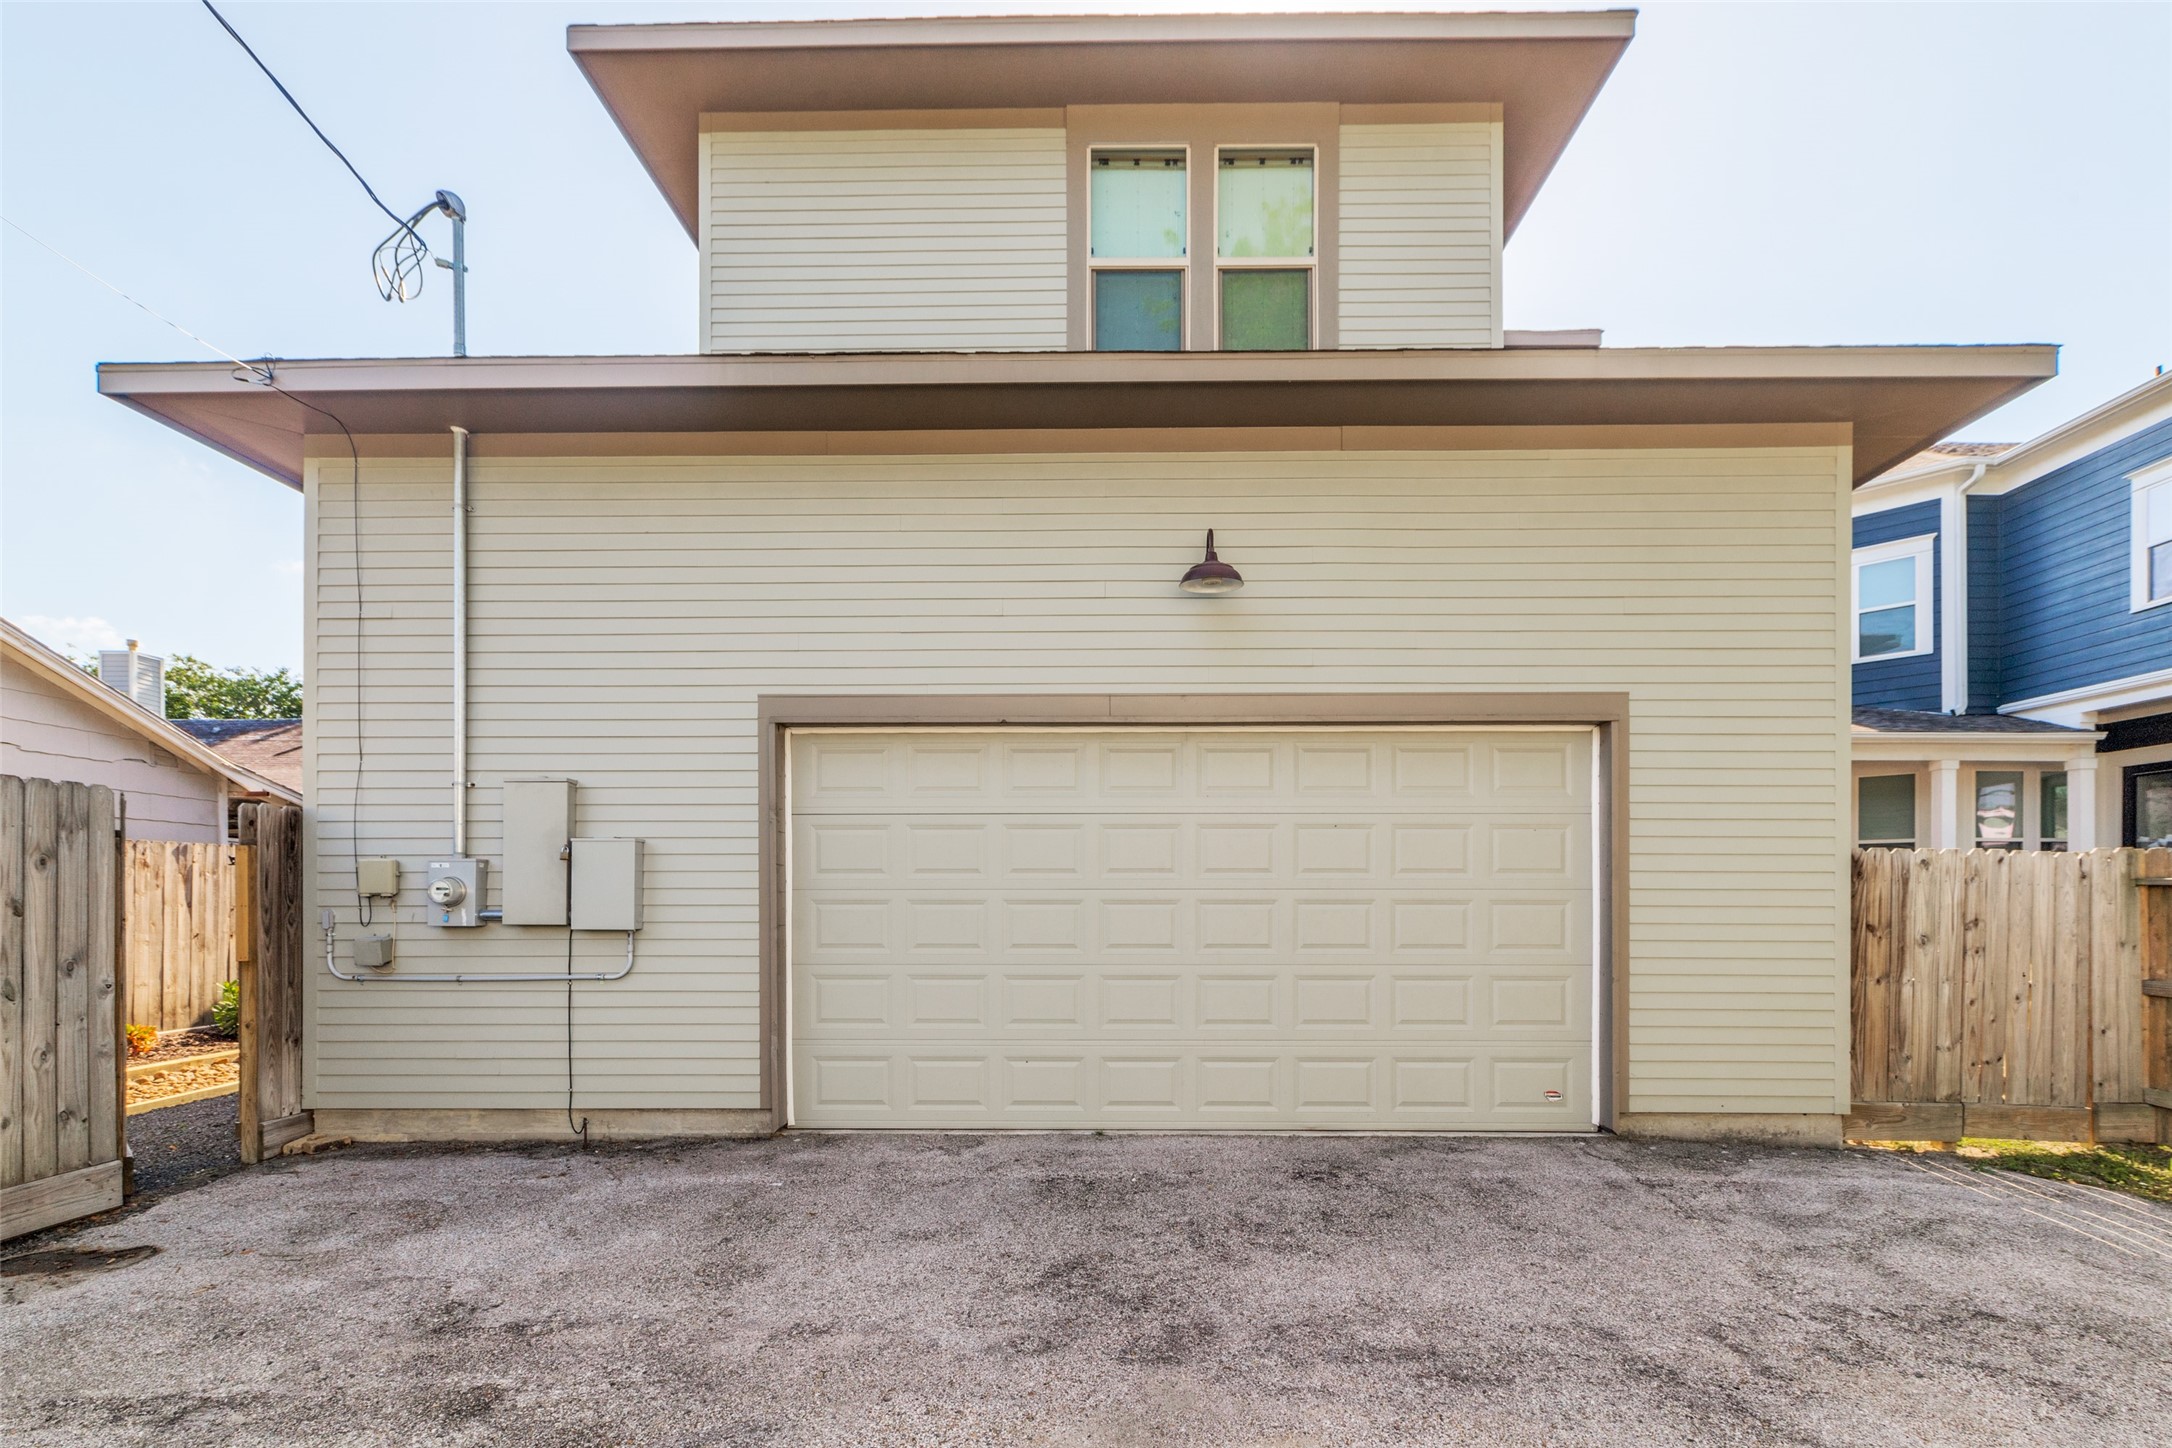 This garage is a rarity! Oversize, with room for a workshop, area or storage. You could make it a workout area.